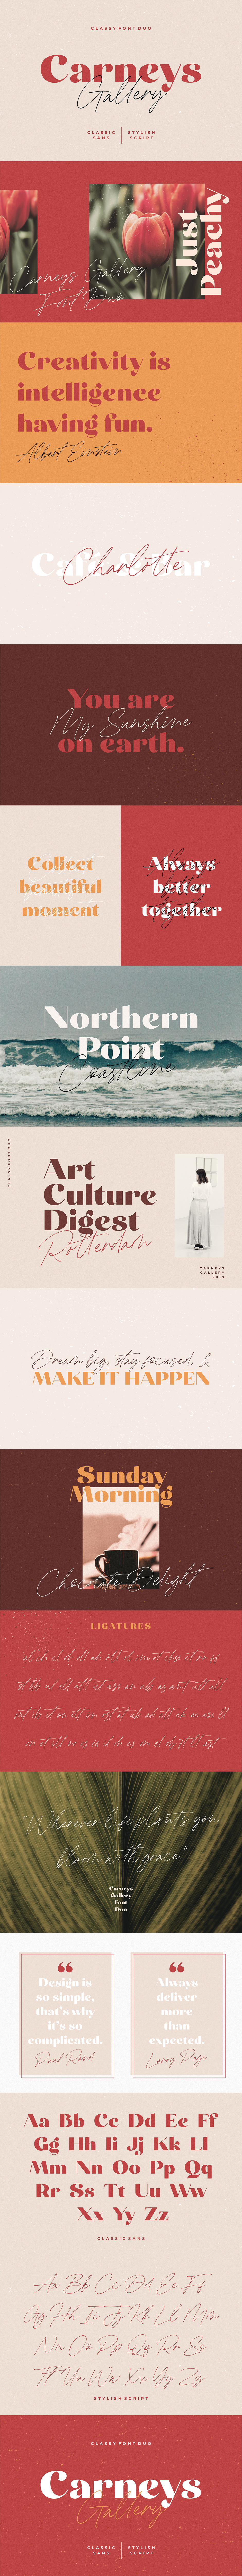 Free Carneys Gallery Sans Serif Font is an incredibly charming and classy font.